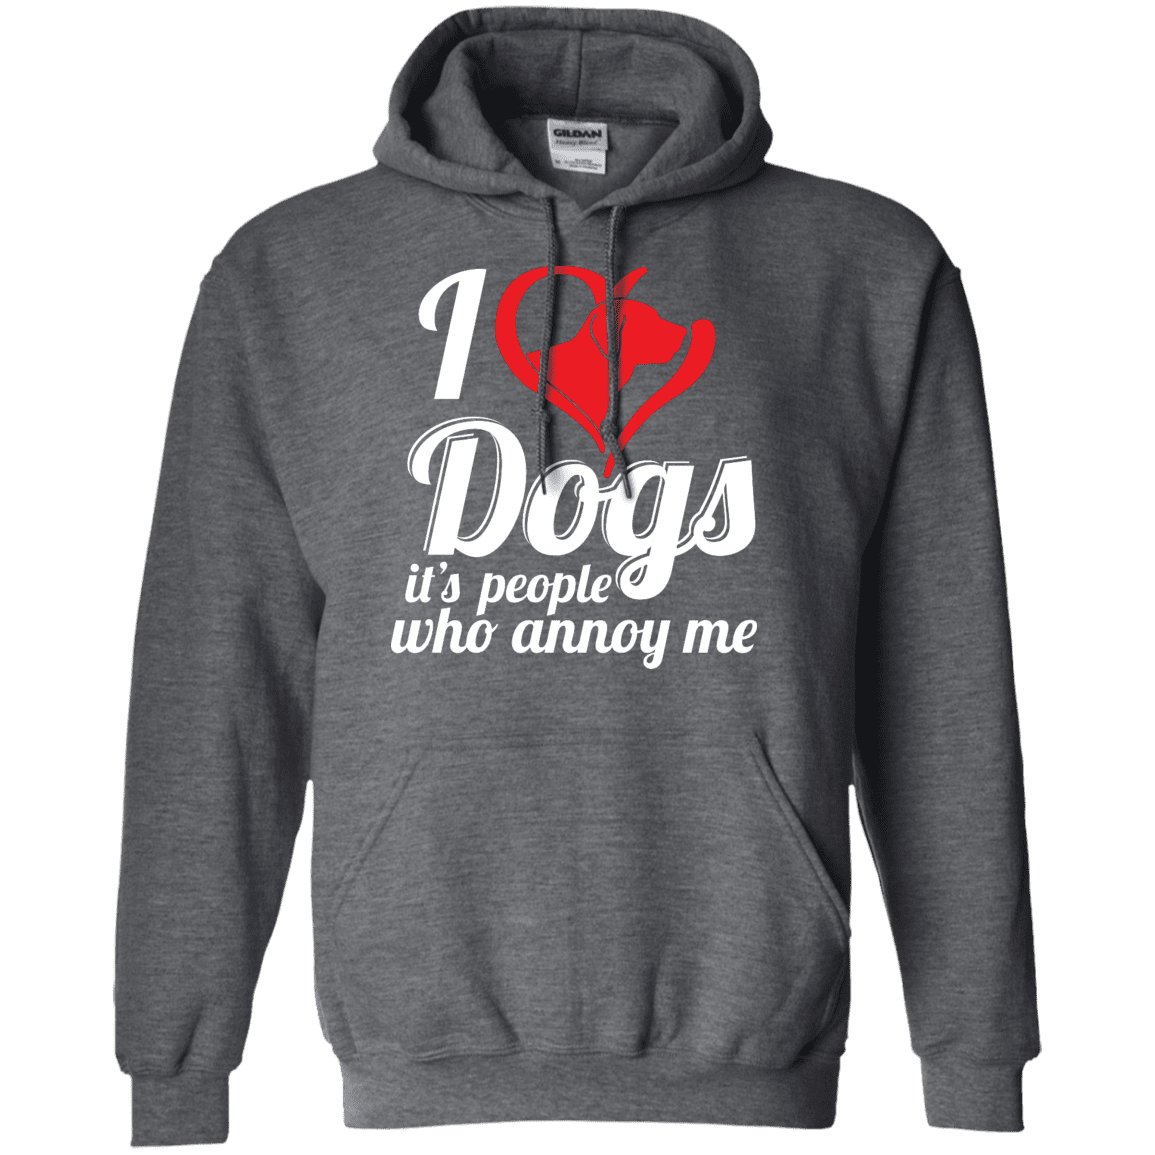 I Love Dogs - Hoodie – Rescuers Club